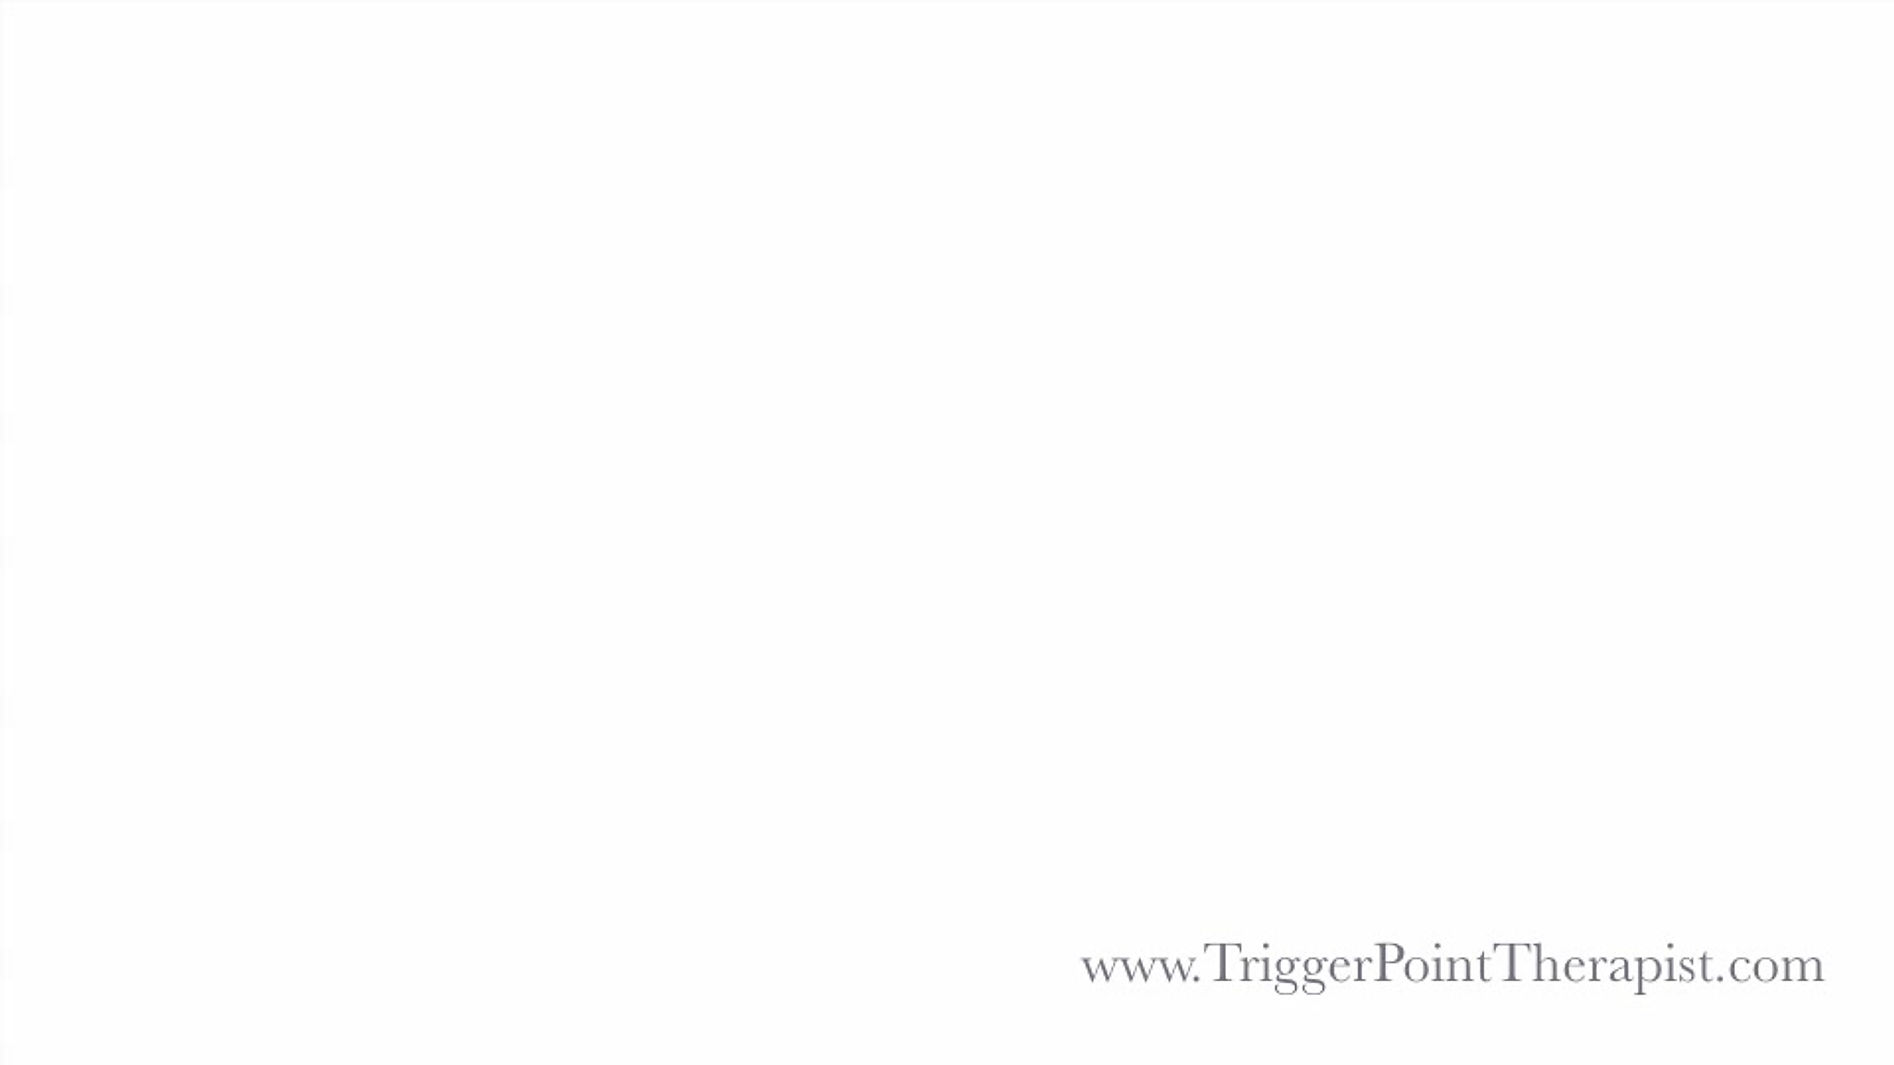 Cervical Trigger Point injections